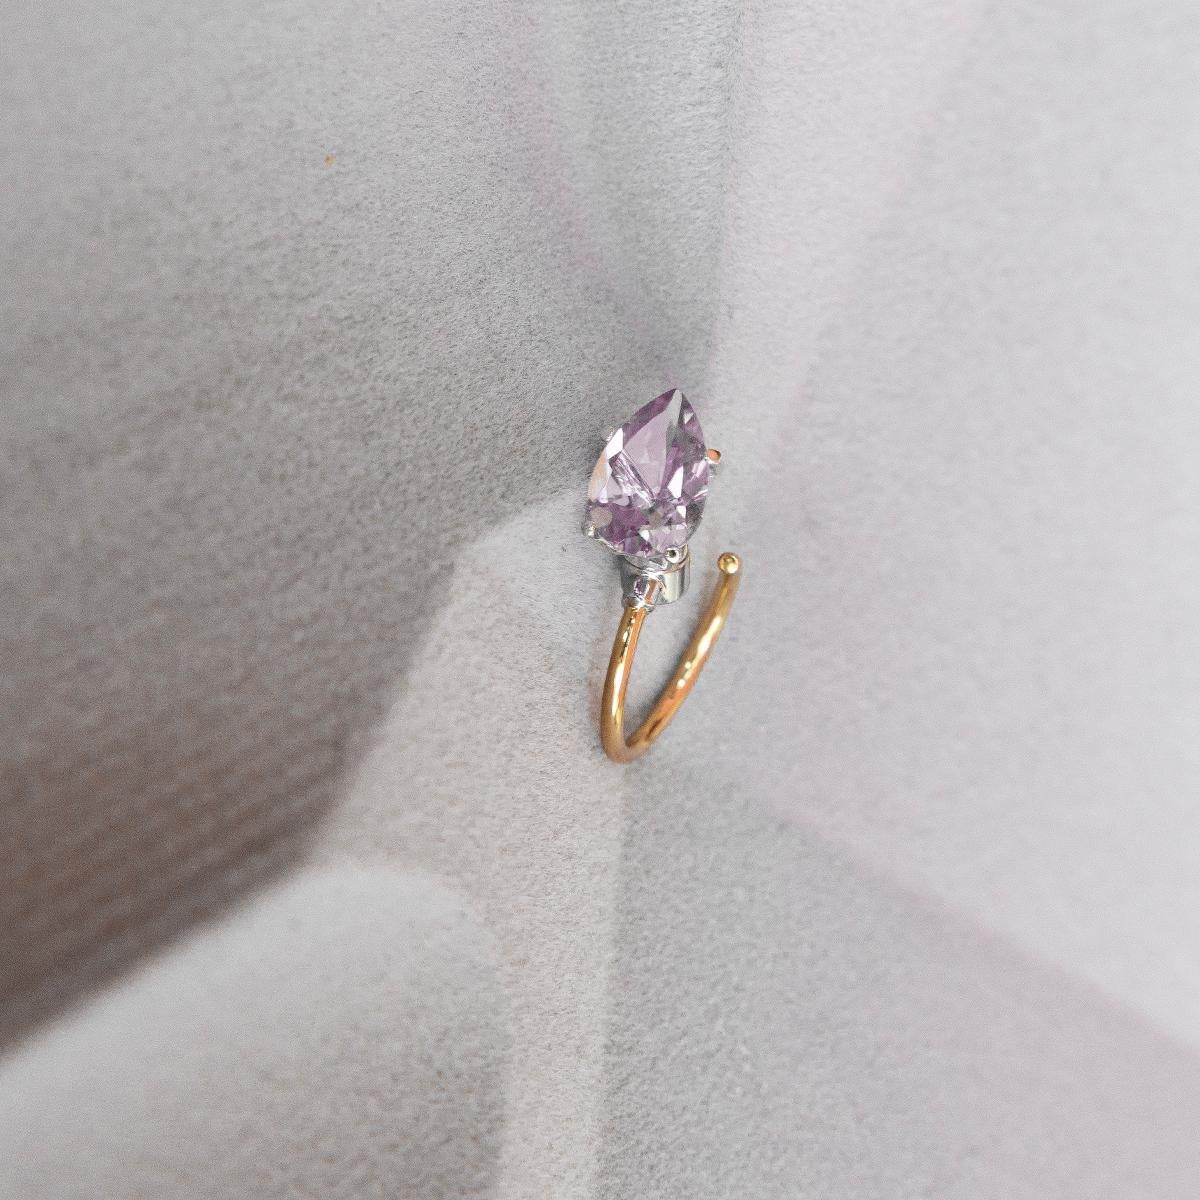 Golden Yellow  Ring, 18K and Pink Amethyst, pear cut (4.5 ct) in 
Playful yet elegant, the pink amethyst touch will elevate your everyday looks.

Our modular jewelry allows you to mount or remove the gem from the ring, this is only possible with a